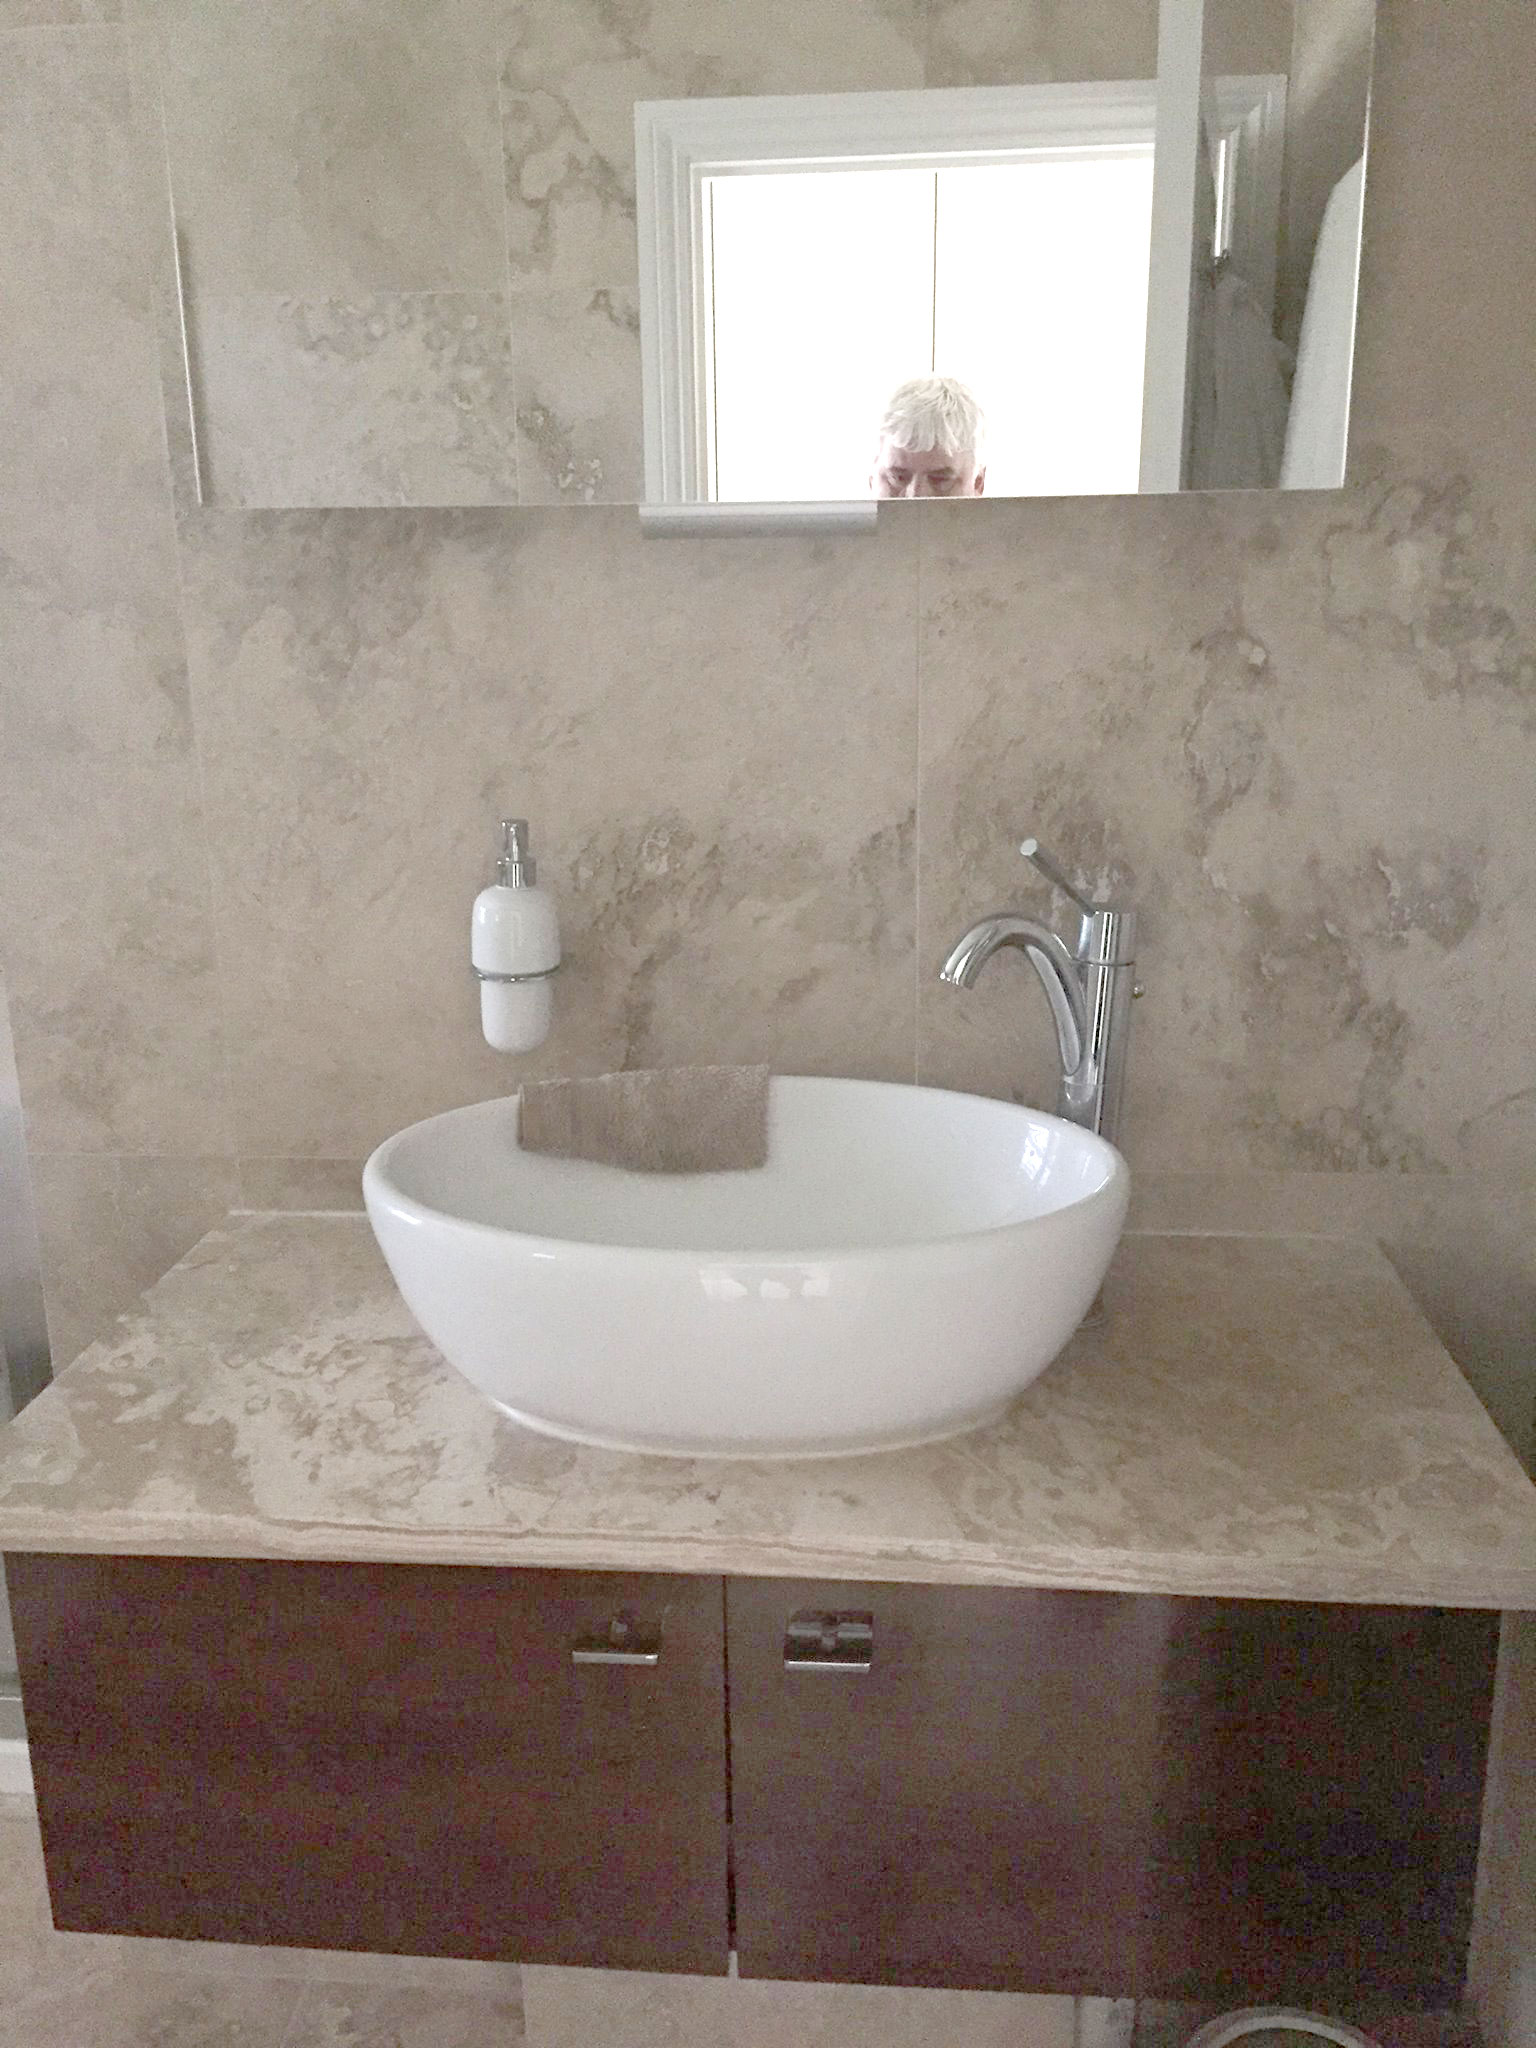 Style Plumbing & Heating bowl sink with marble finish